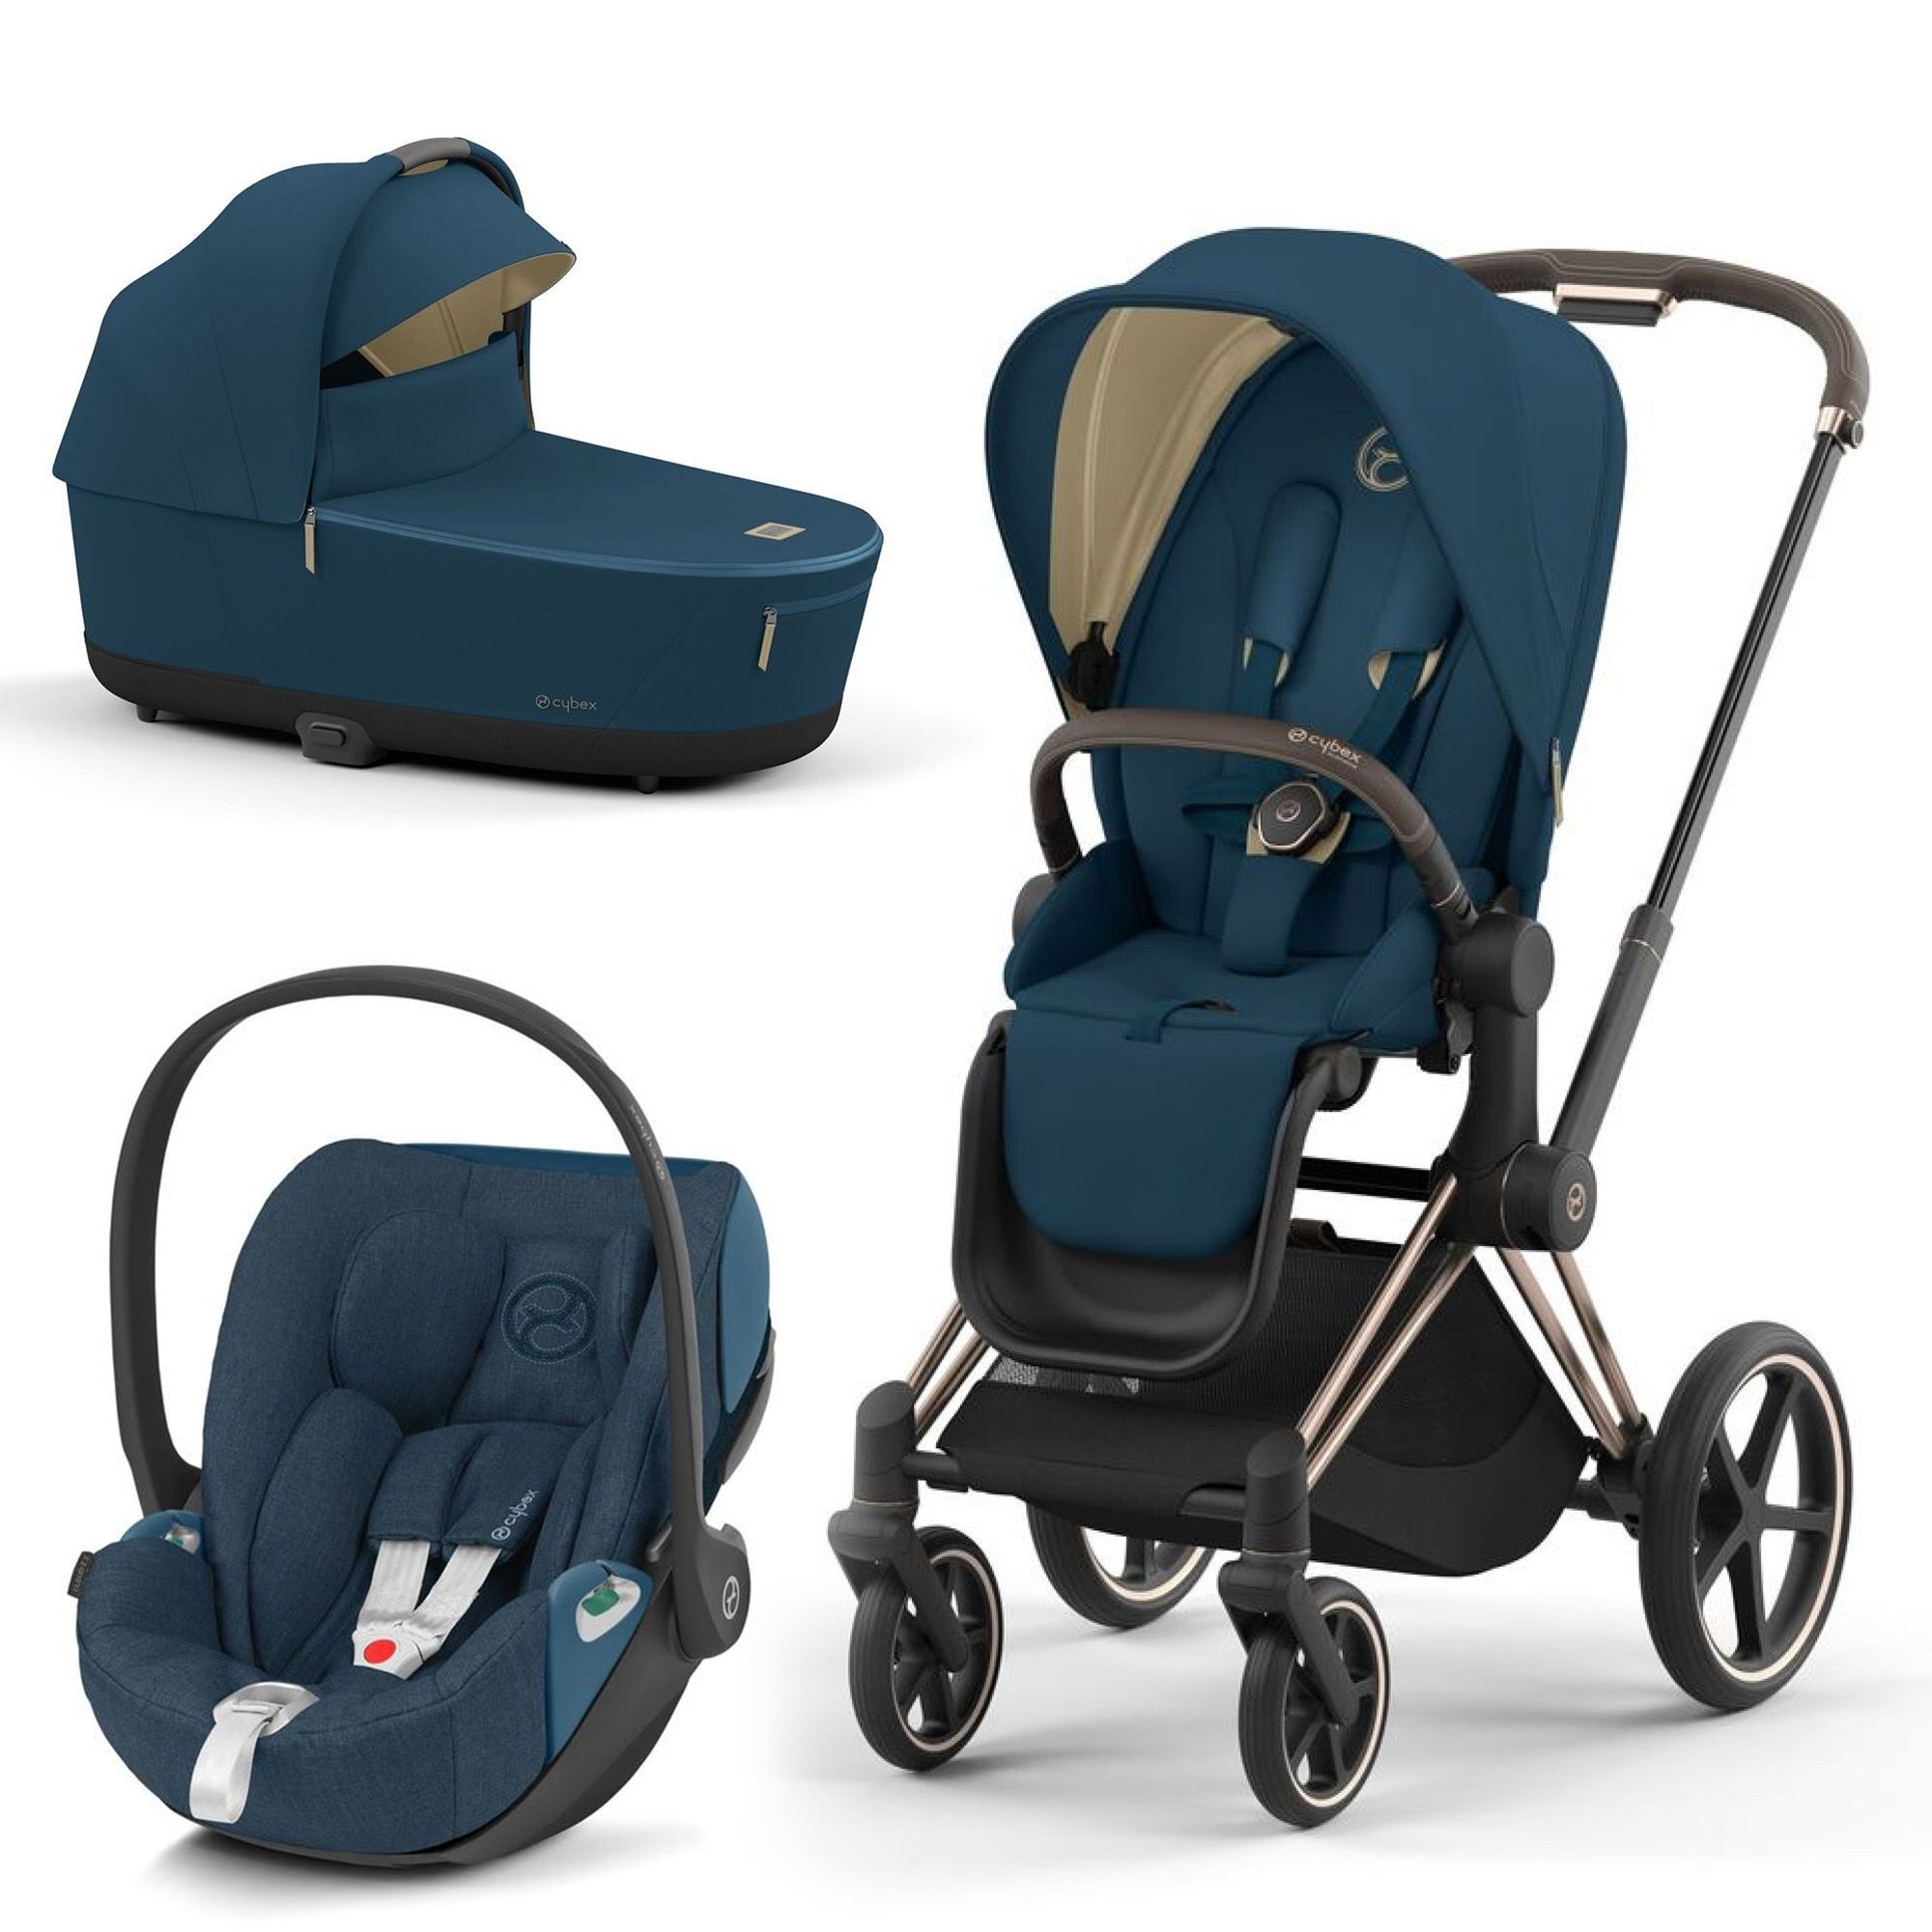 https://www.madeinbebe.com/boutique/uploads/articles/zoom/pack-poussette-trio-priam--priam-chassis-hardpart-du-siege-inclus-rosegold-rosegoldpriam-pack-siege-mountain-blue-turquoisecloud_OA.jpg